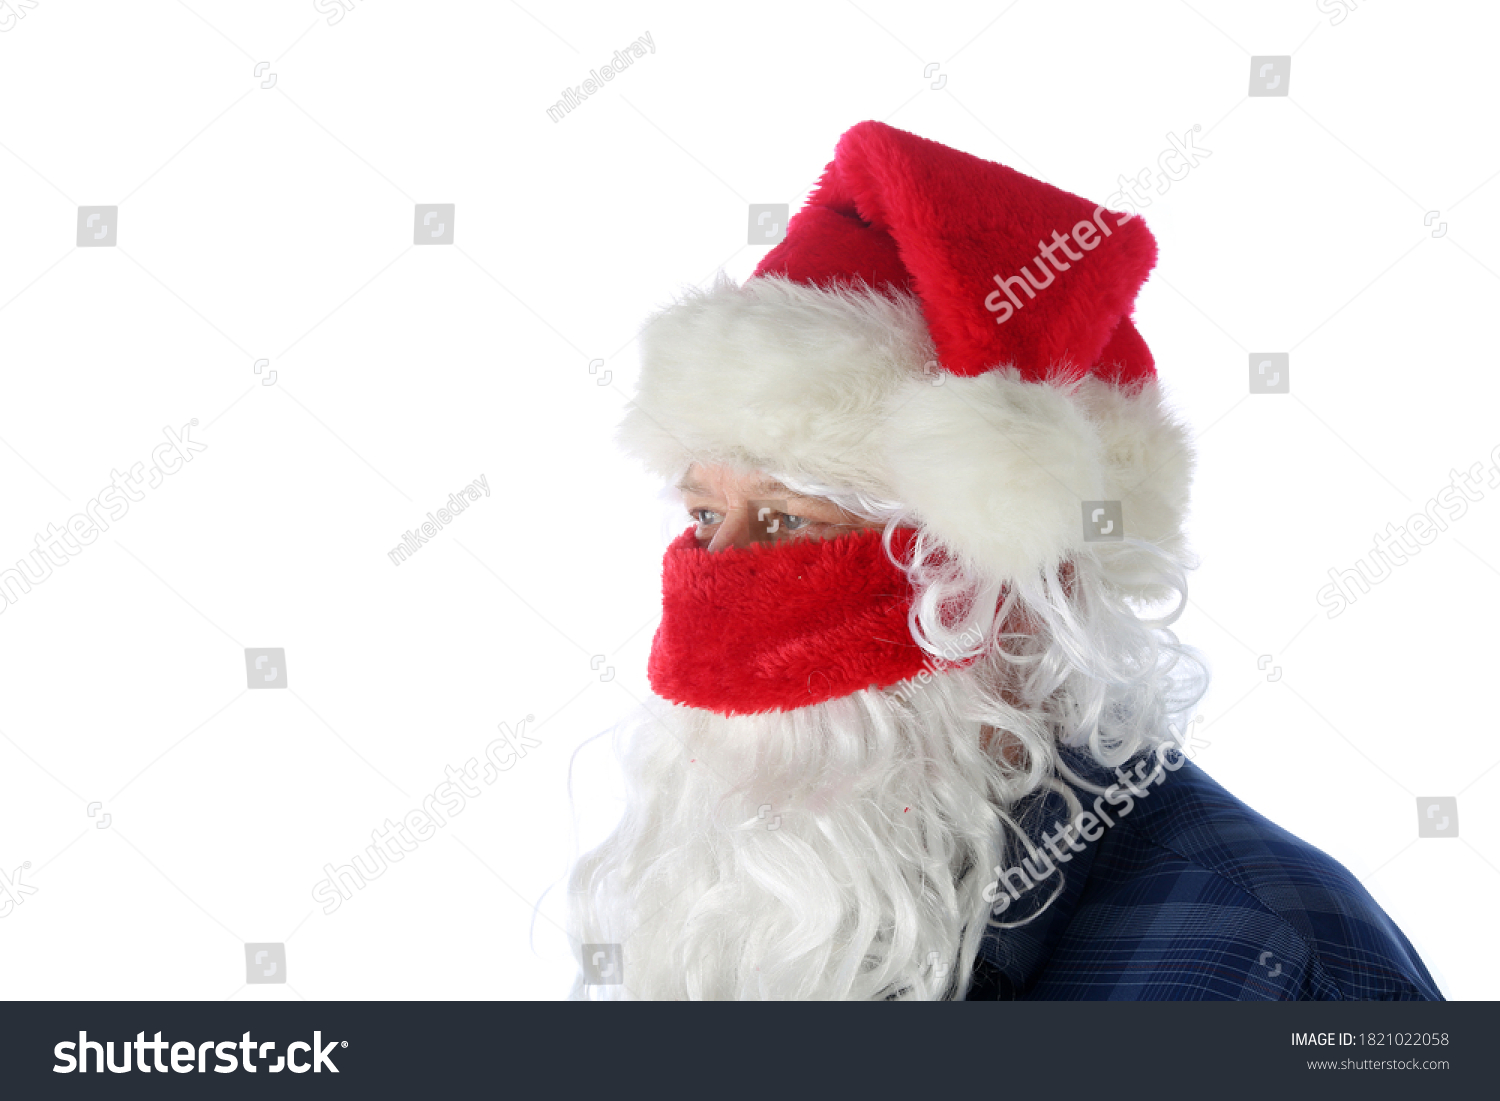 Casual Santa Claus Covid-19. Santa Wears a Blue Shirt, Santa Hat, Protective Face Mask on a causal day before Christmas. Isolated on white. Coronavirus is Dangerous even for Santa. #1821022058